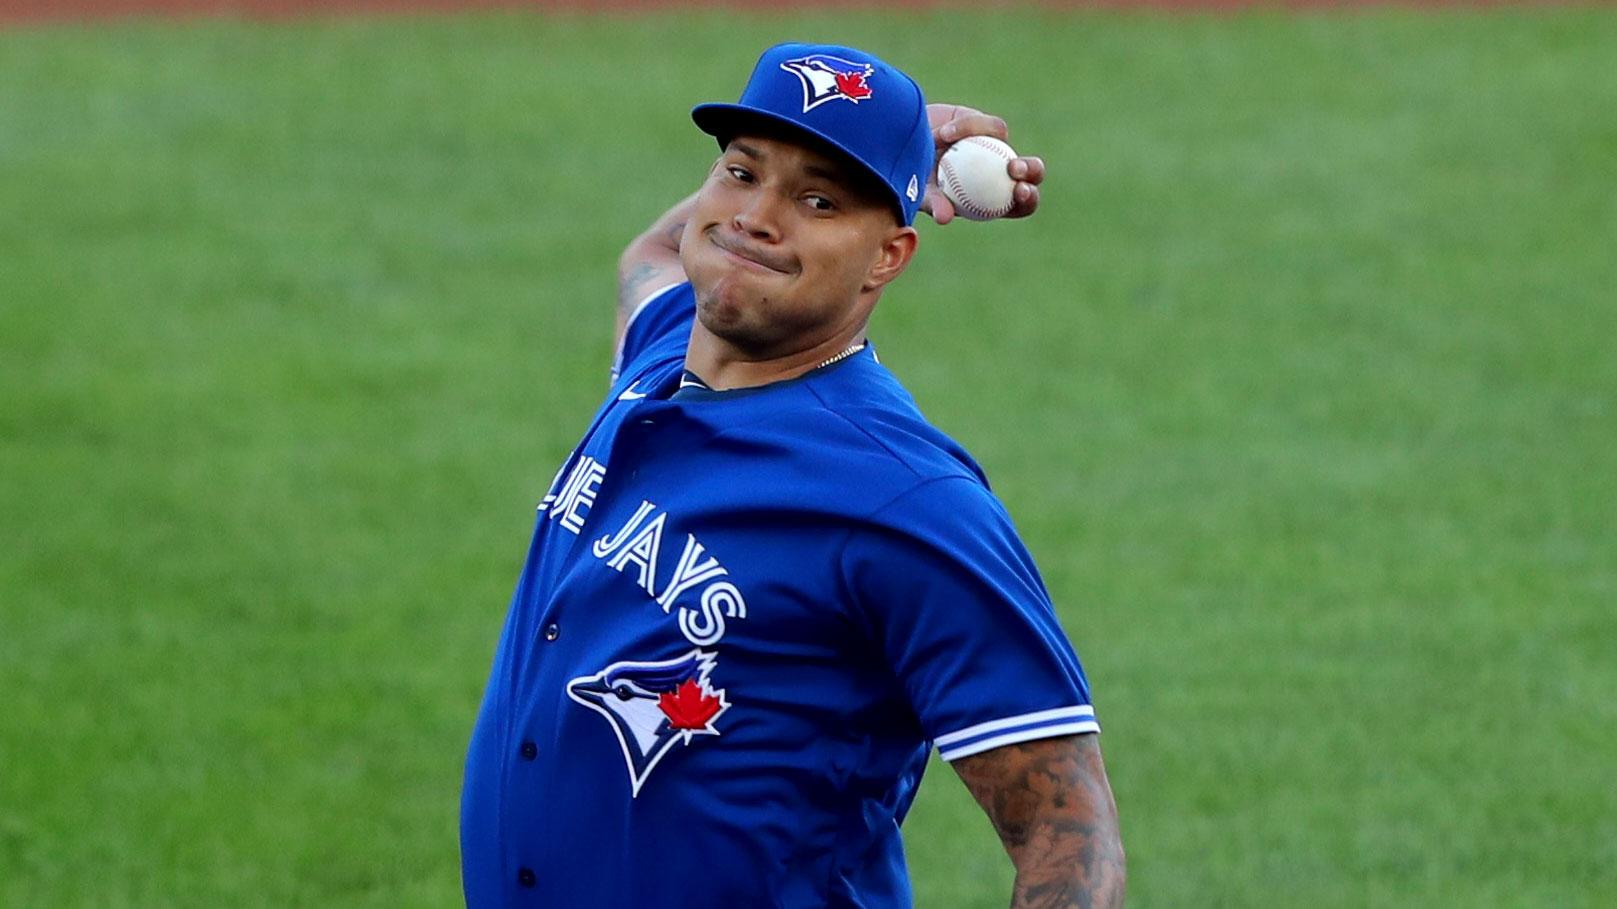 Aug 29, 2020; Buffalo, New York, USA; Toronto Blue Jays starting pitcher Taijuan Walker (00) throws a pitch during the first inning against the Baltimore Orioles at Sahlen Field. / Timothy T. Ludwig-USA TODAY Sports